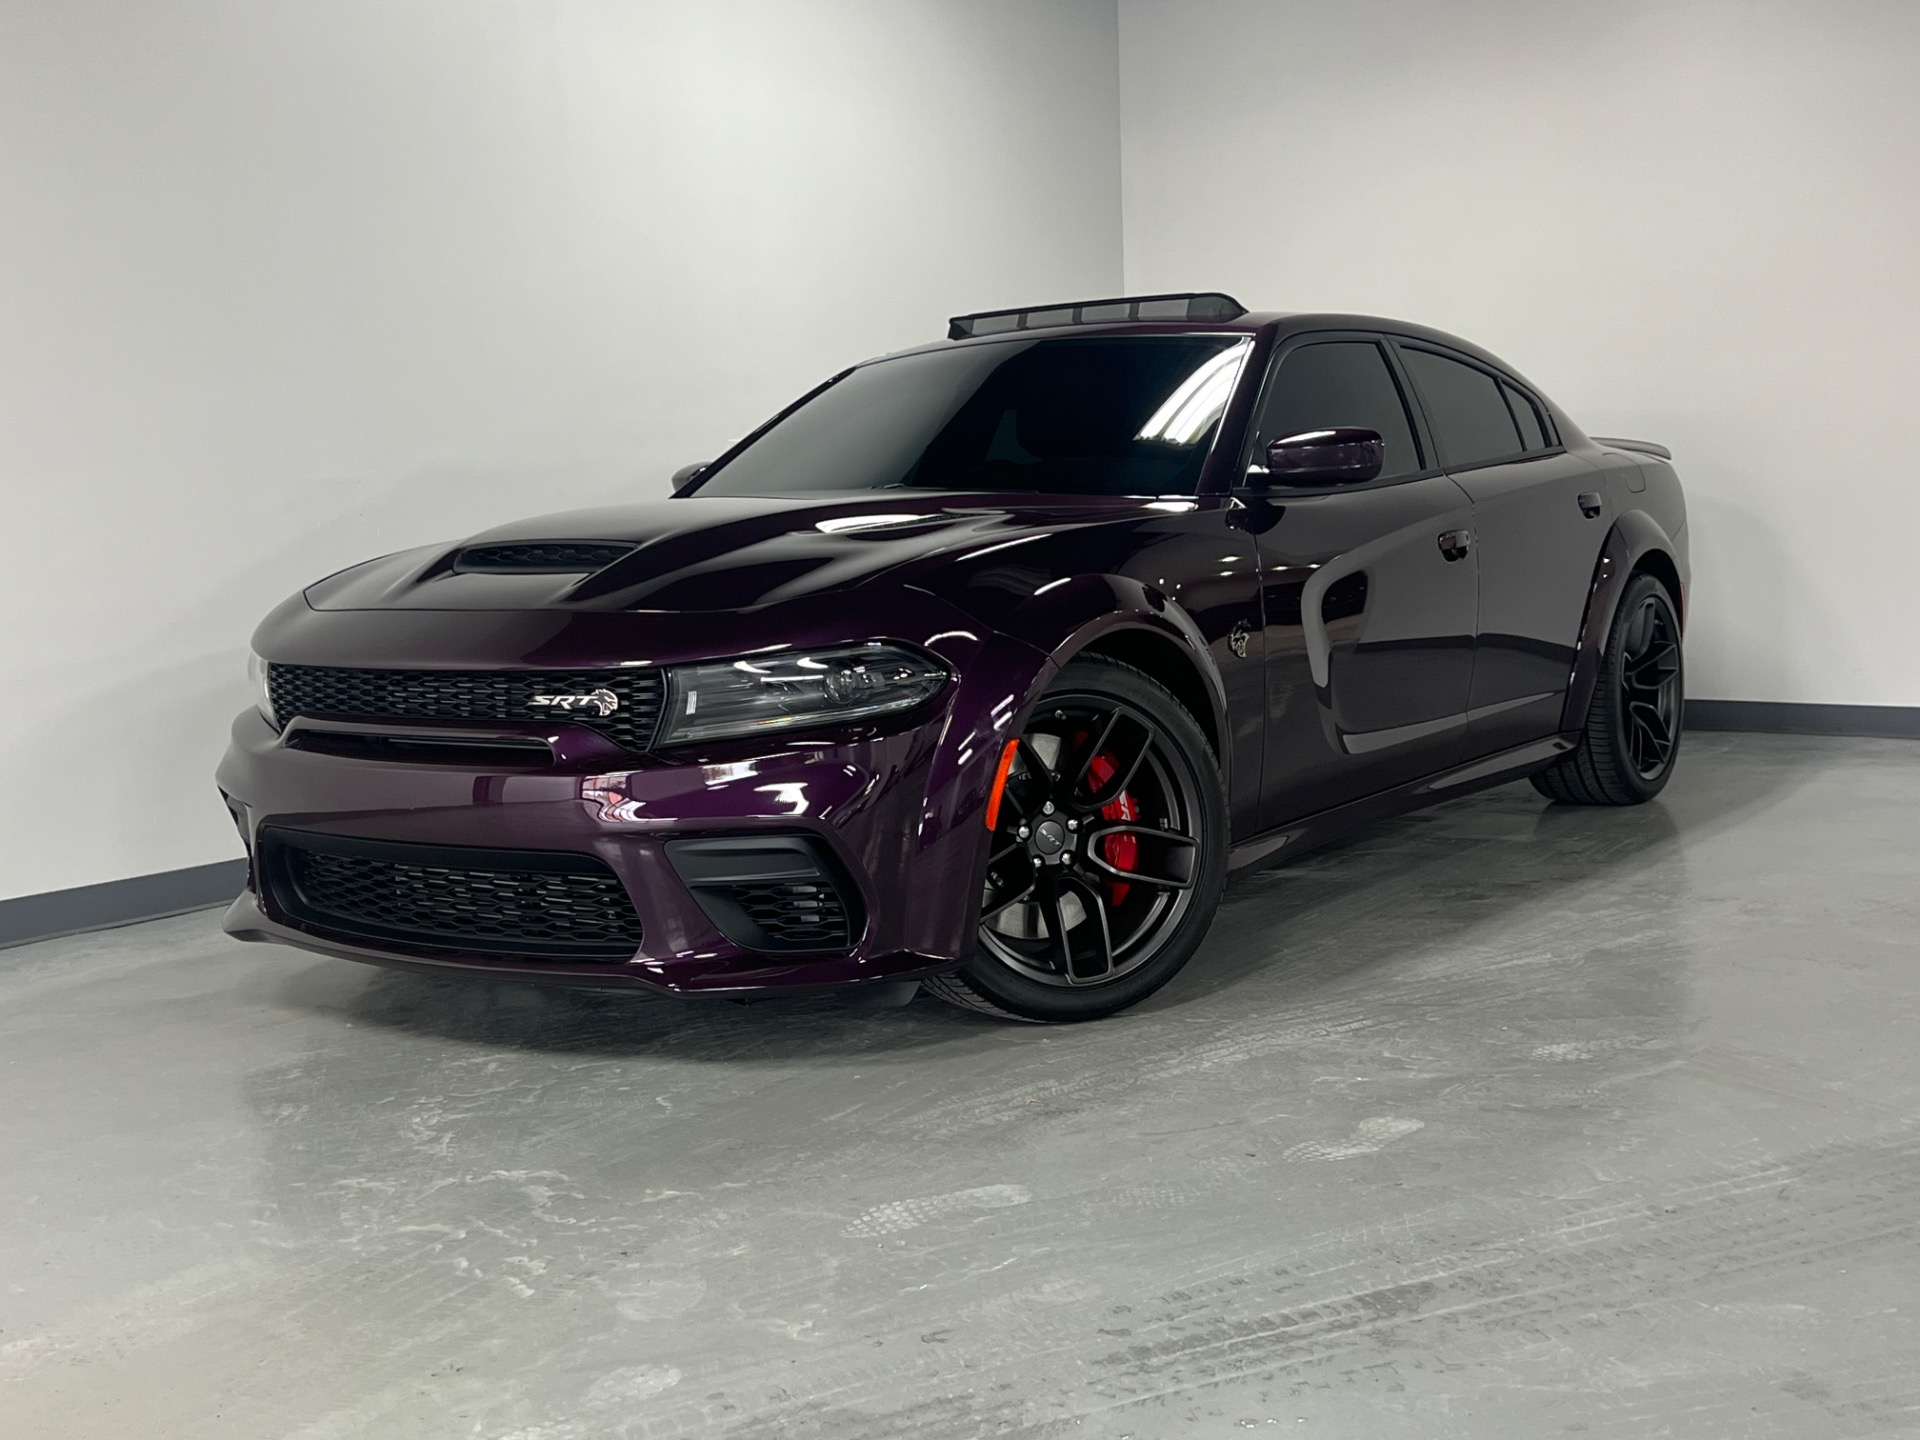 Used 2022 Hellraisin Dodge Charger SRT HELLCAT REDEYE WIDEBODY JAILBREAK  797HP SRT Hellcat Redeye Widebody For Sale (Sold) | Prime Motorz Stock #3933